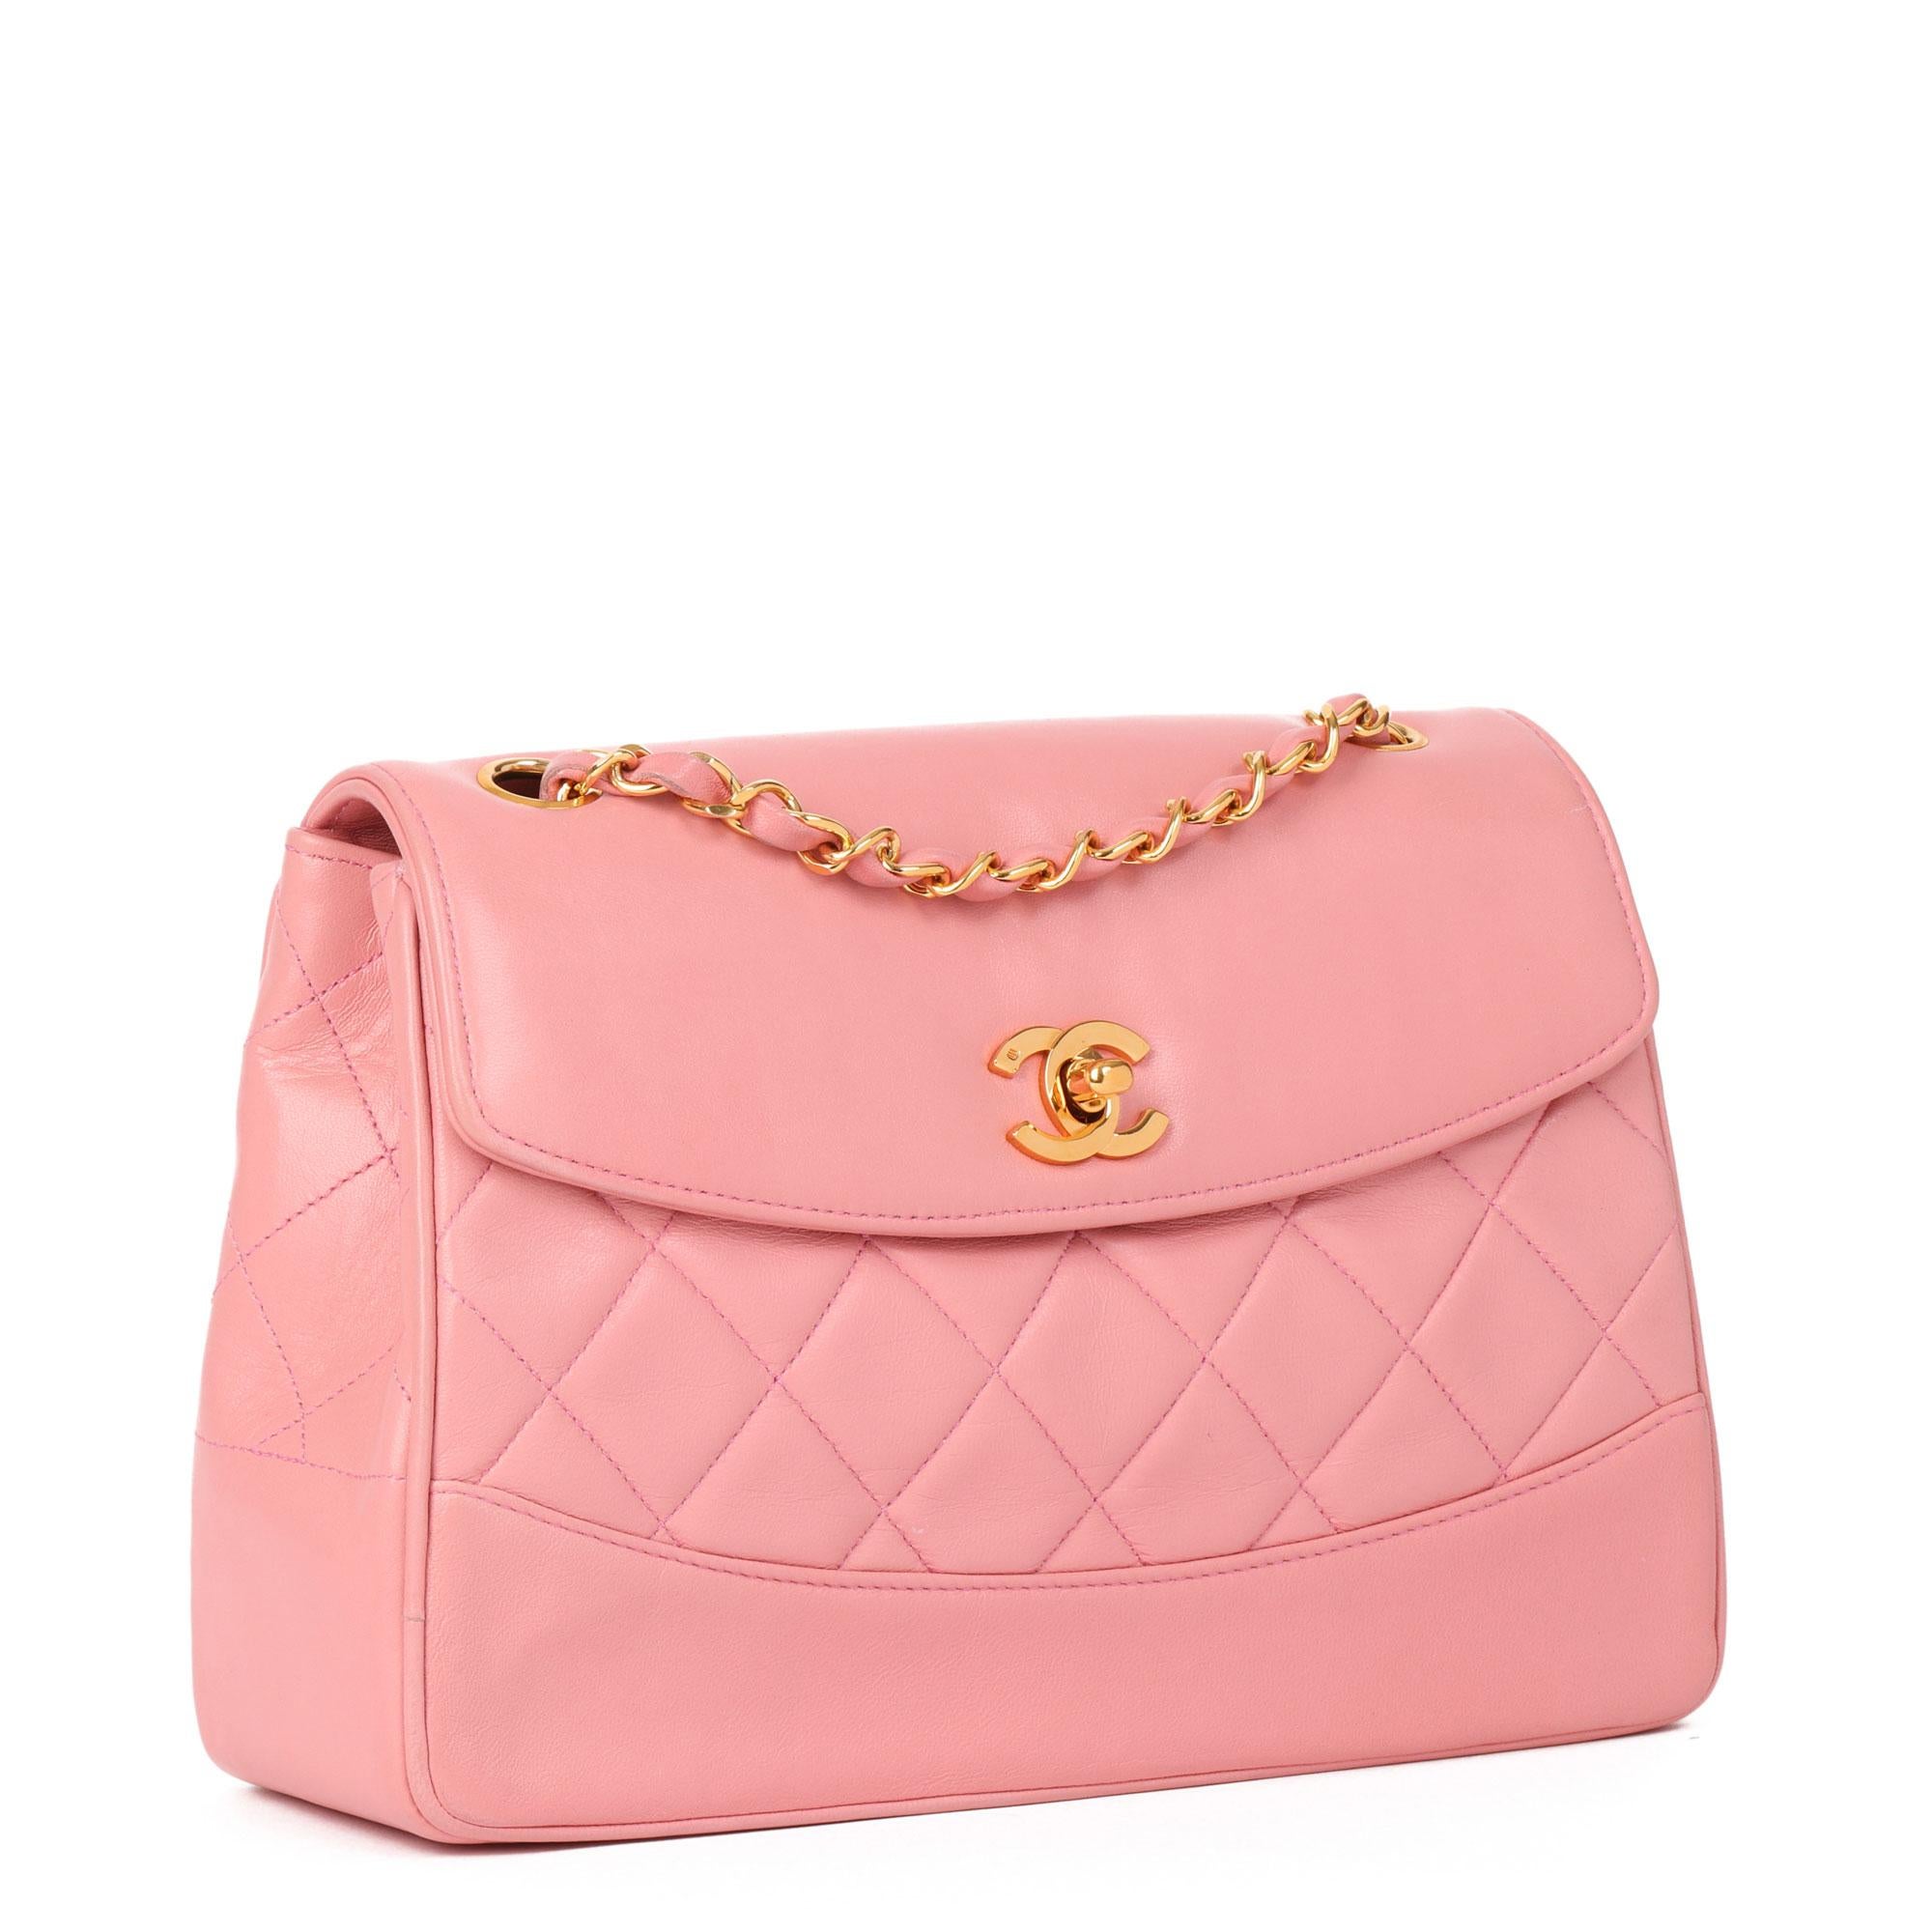 Chanel Pink Quilted Lambskin Vintage Medium Classic Single Flap Bag 2